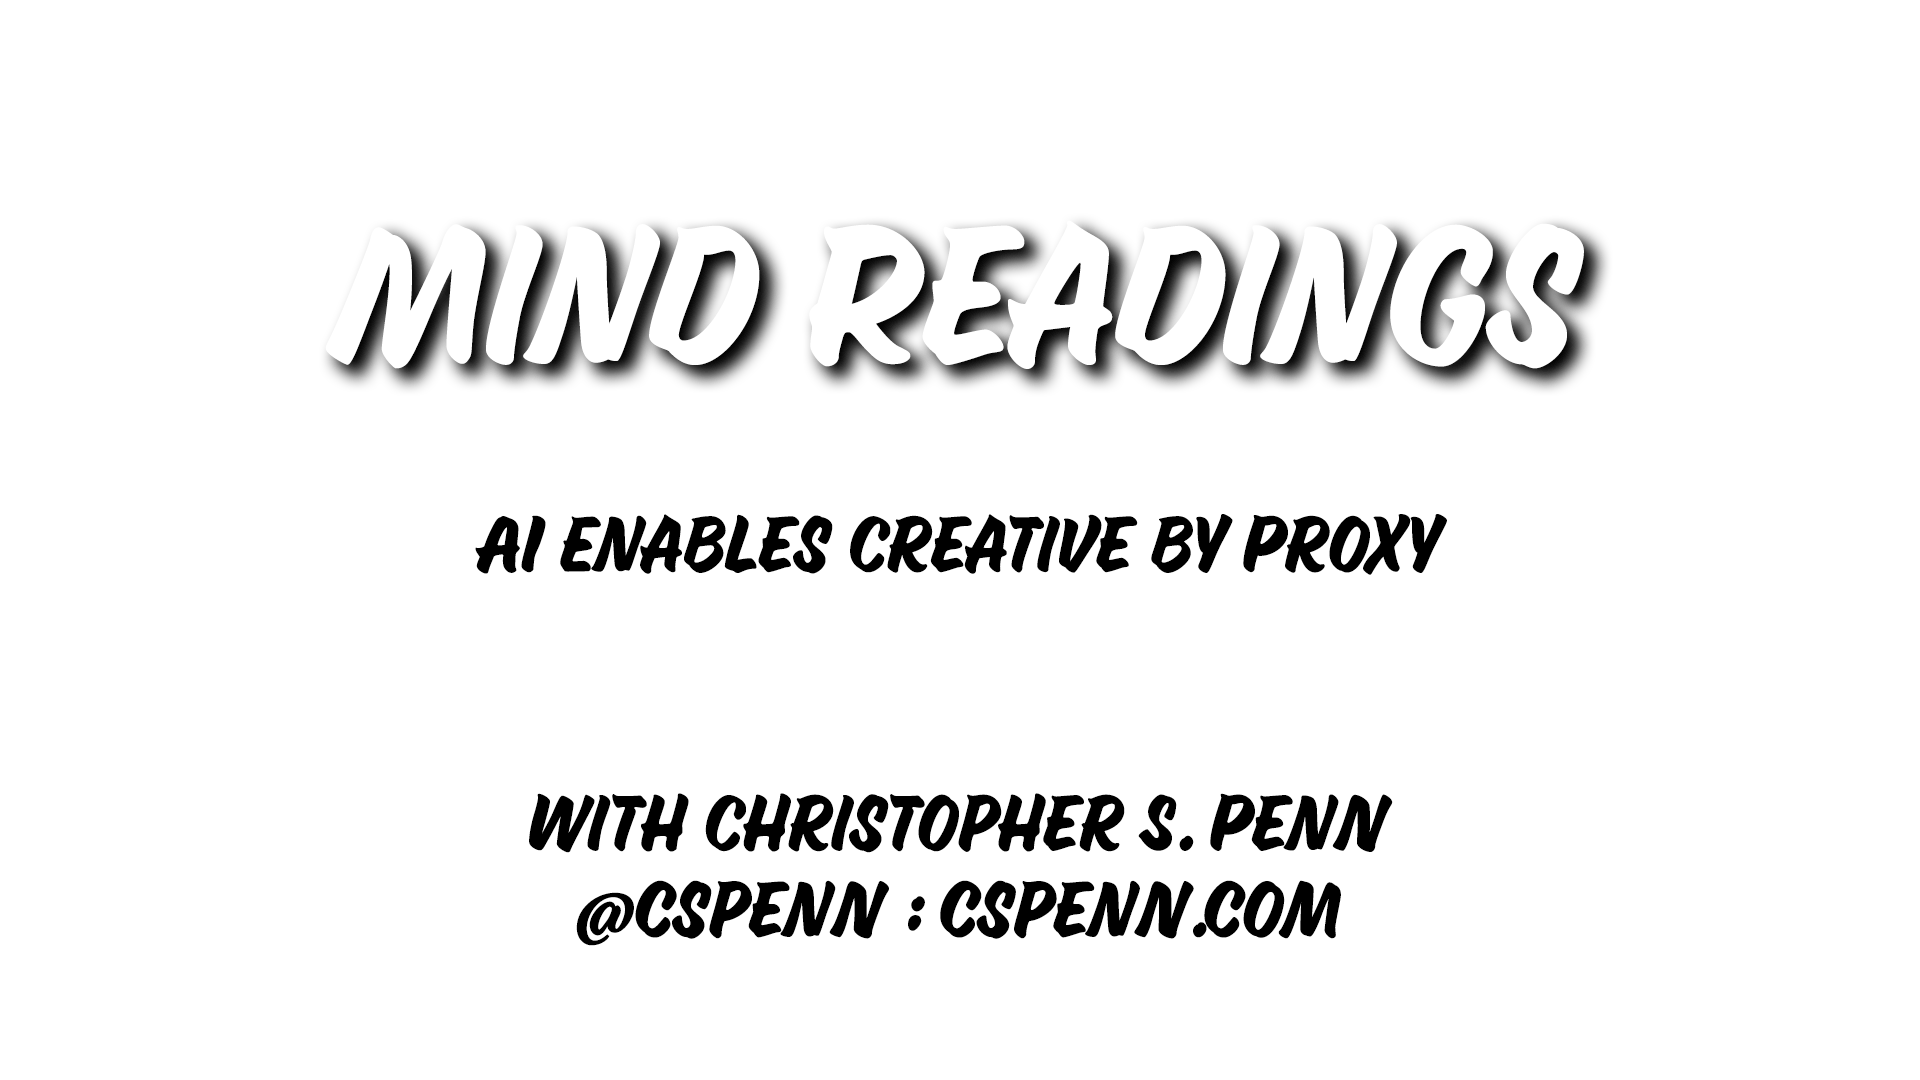 Mind Readings: AI Enables Creative by Proxy